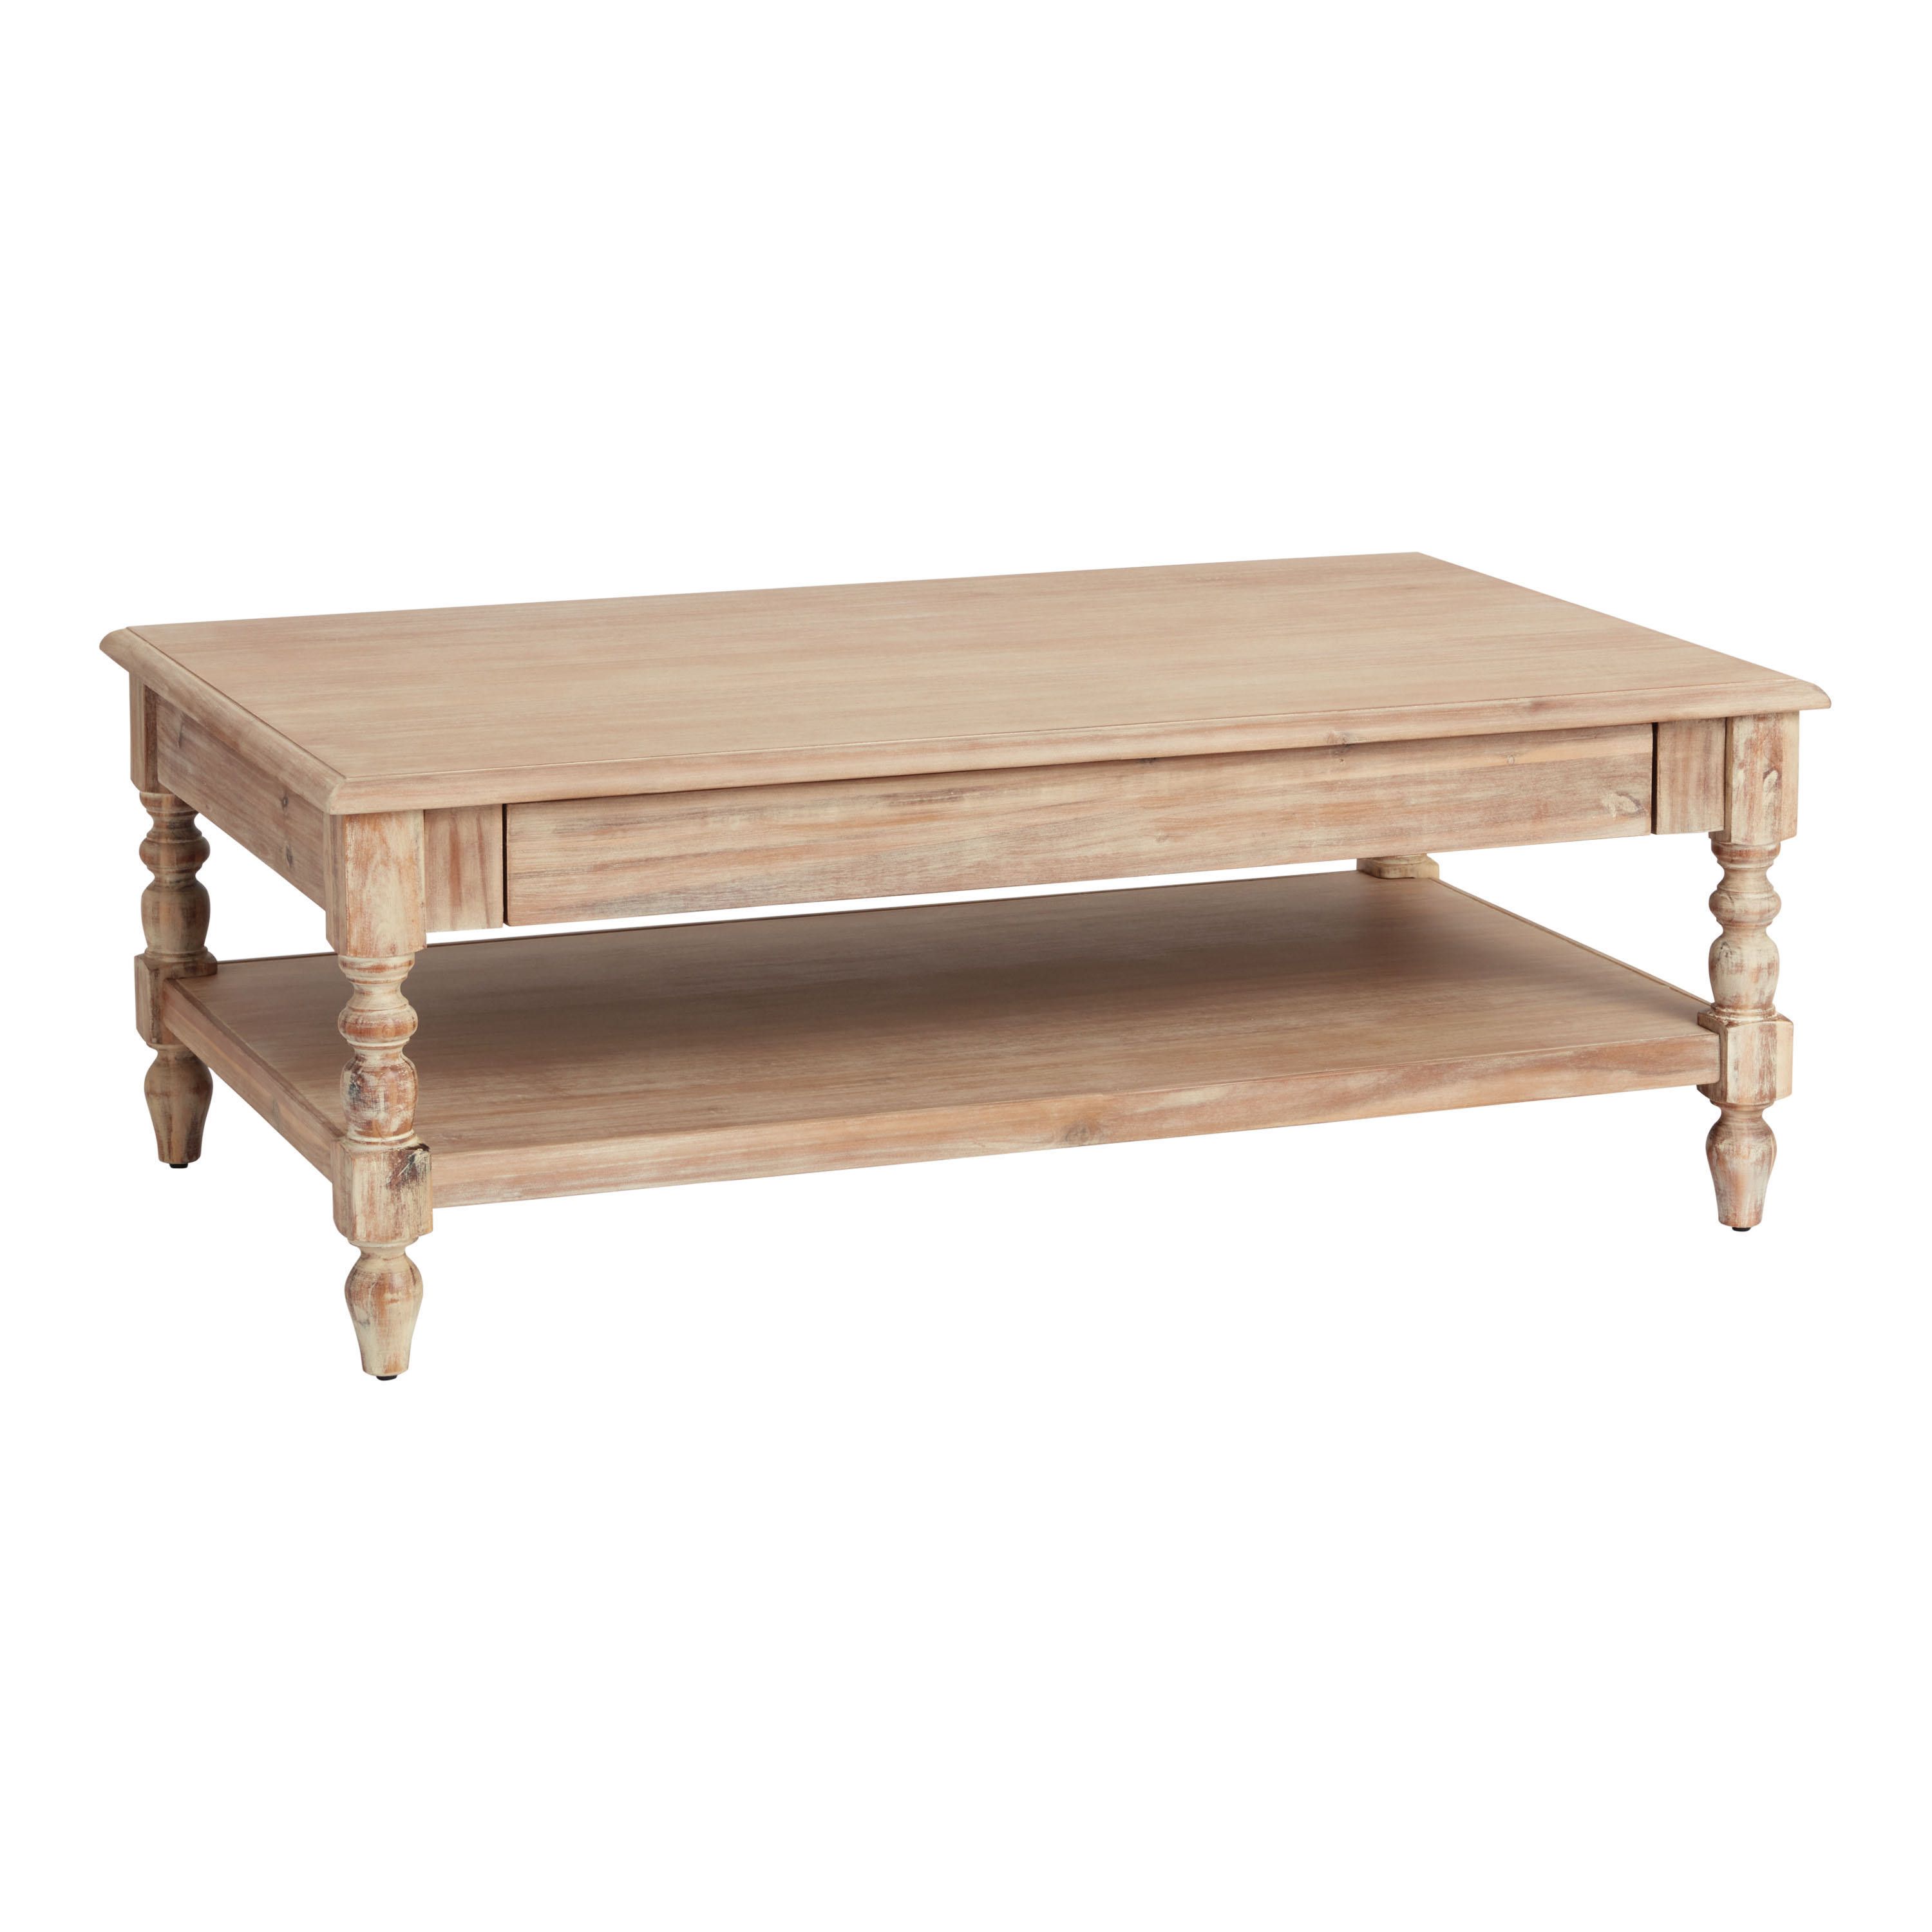 Everett Weathered Natural Wood Coffee Table | World Market